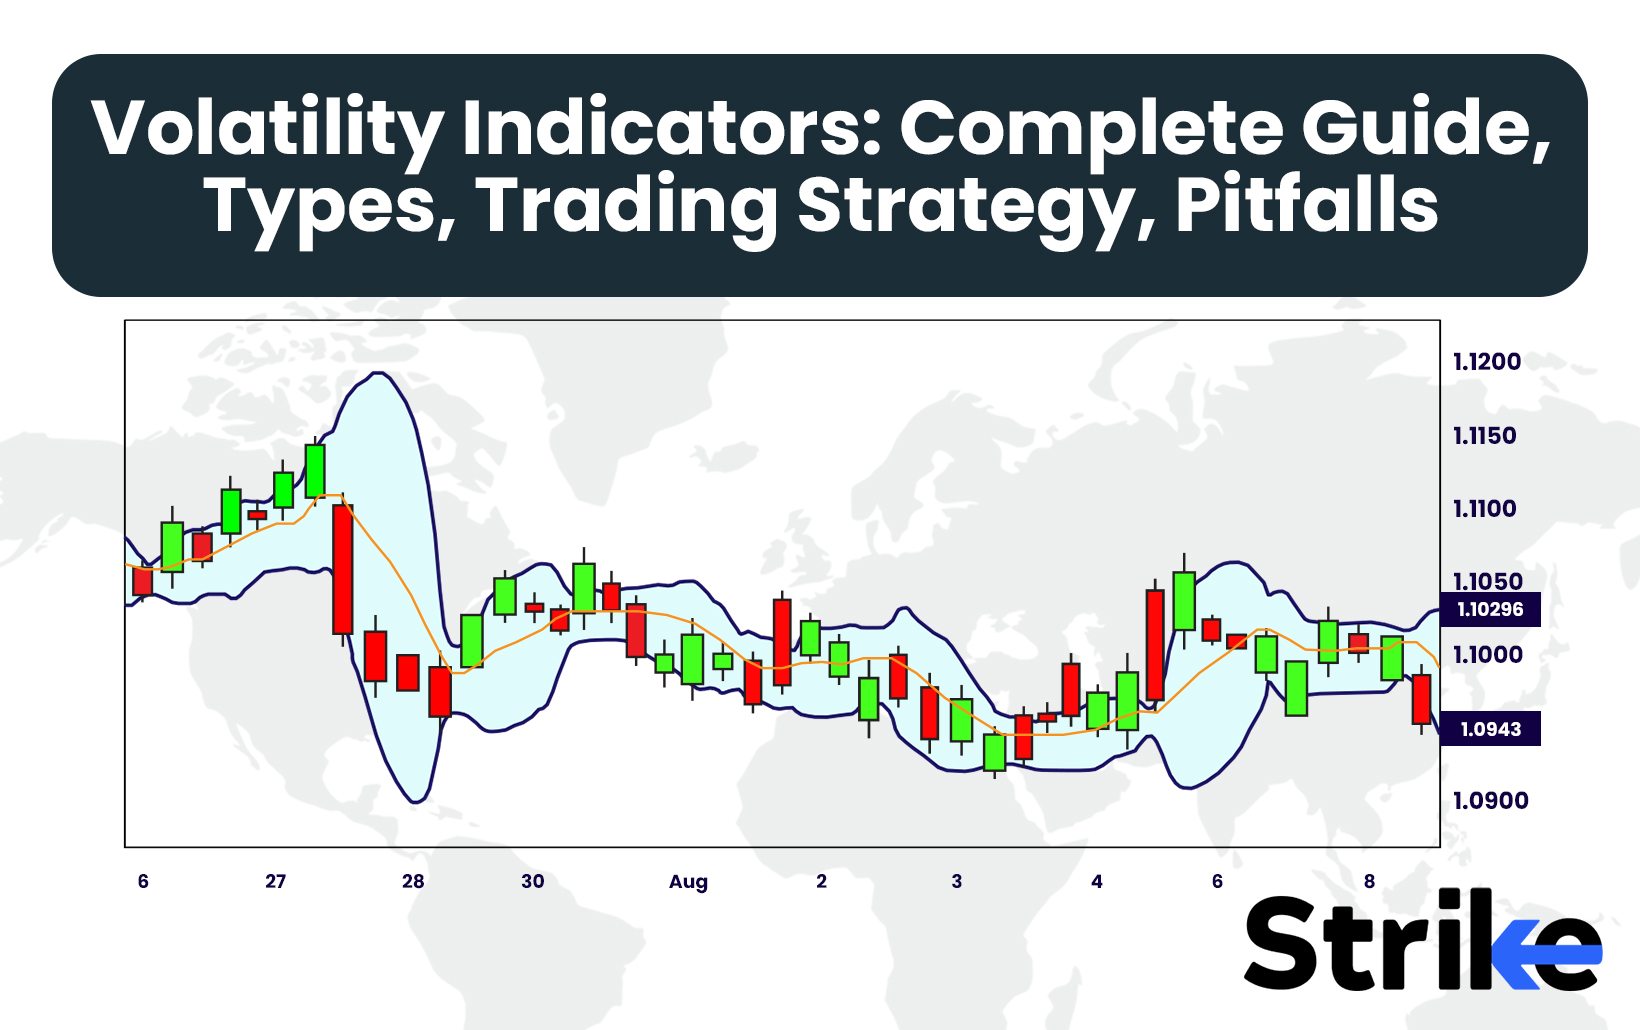 Volatility Indicators: Complete Guide, Types, Trading Strategy, Pitfalls